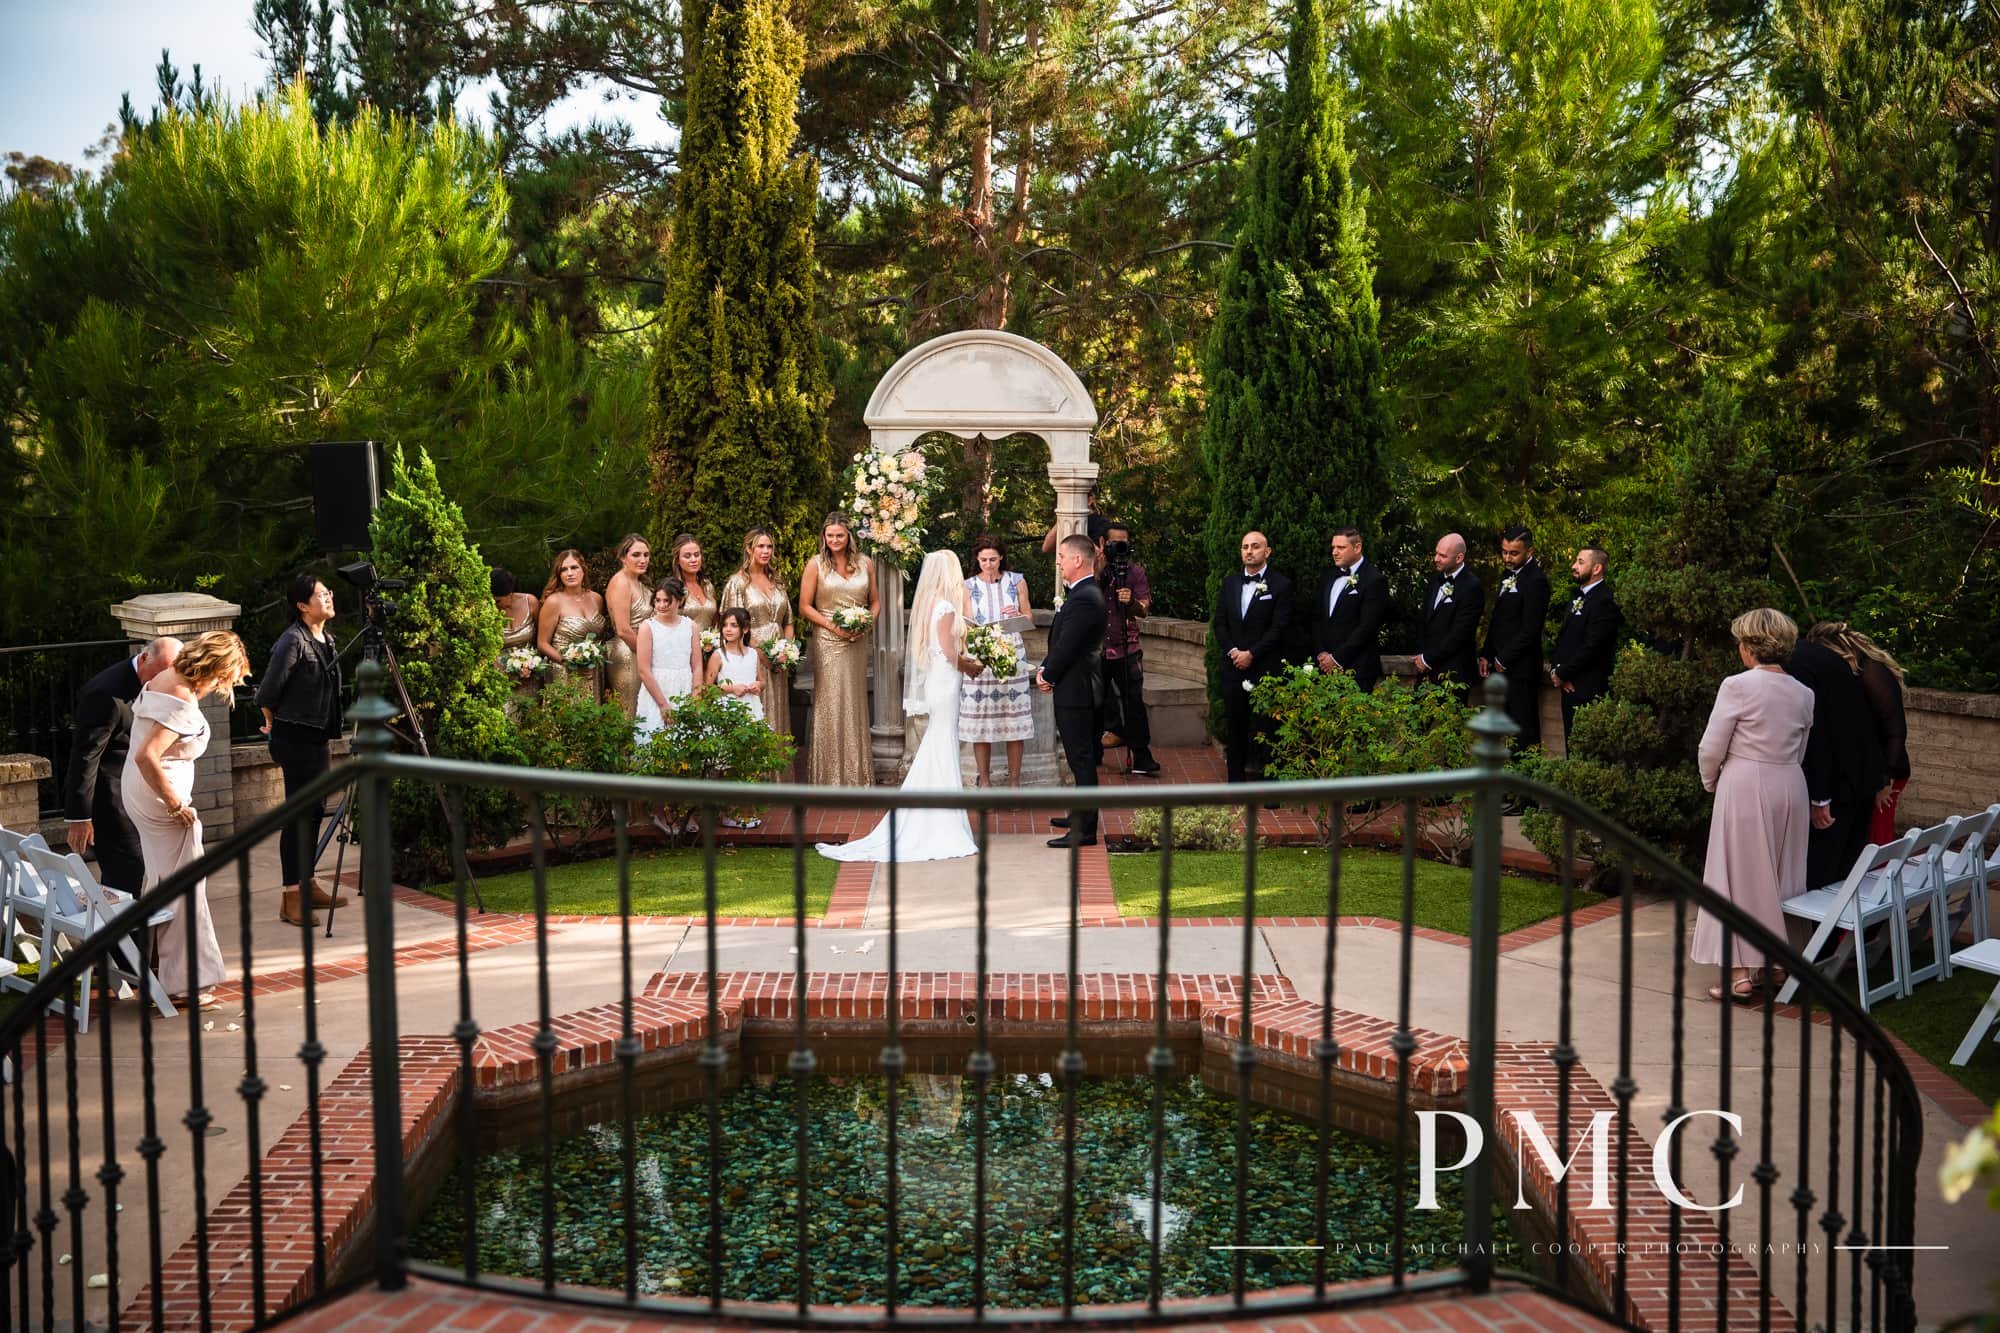 A wedding ceremony in a courtyard with a fountain and surrounding green trees and foliage.